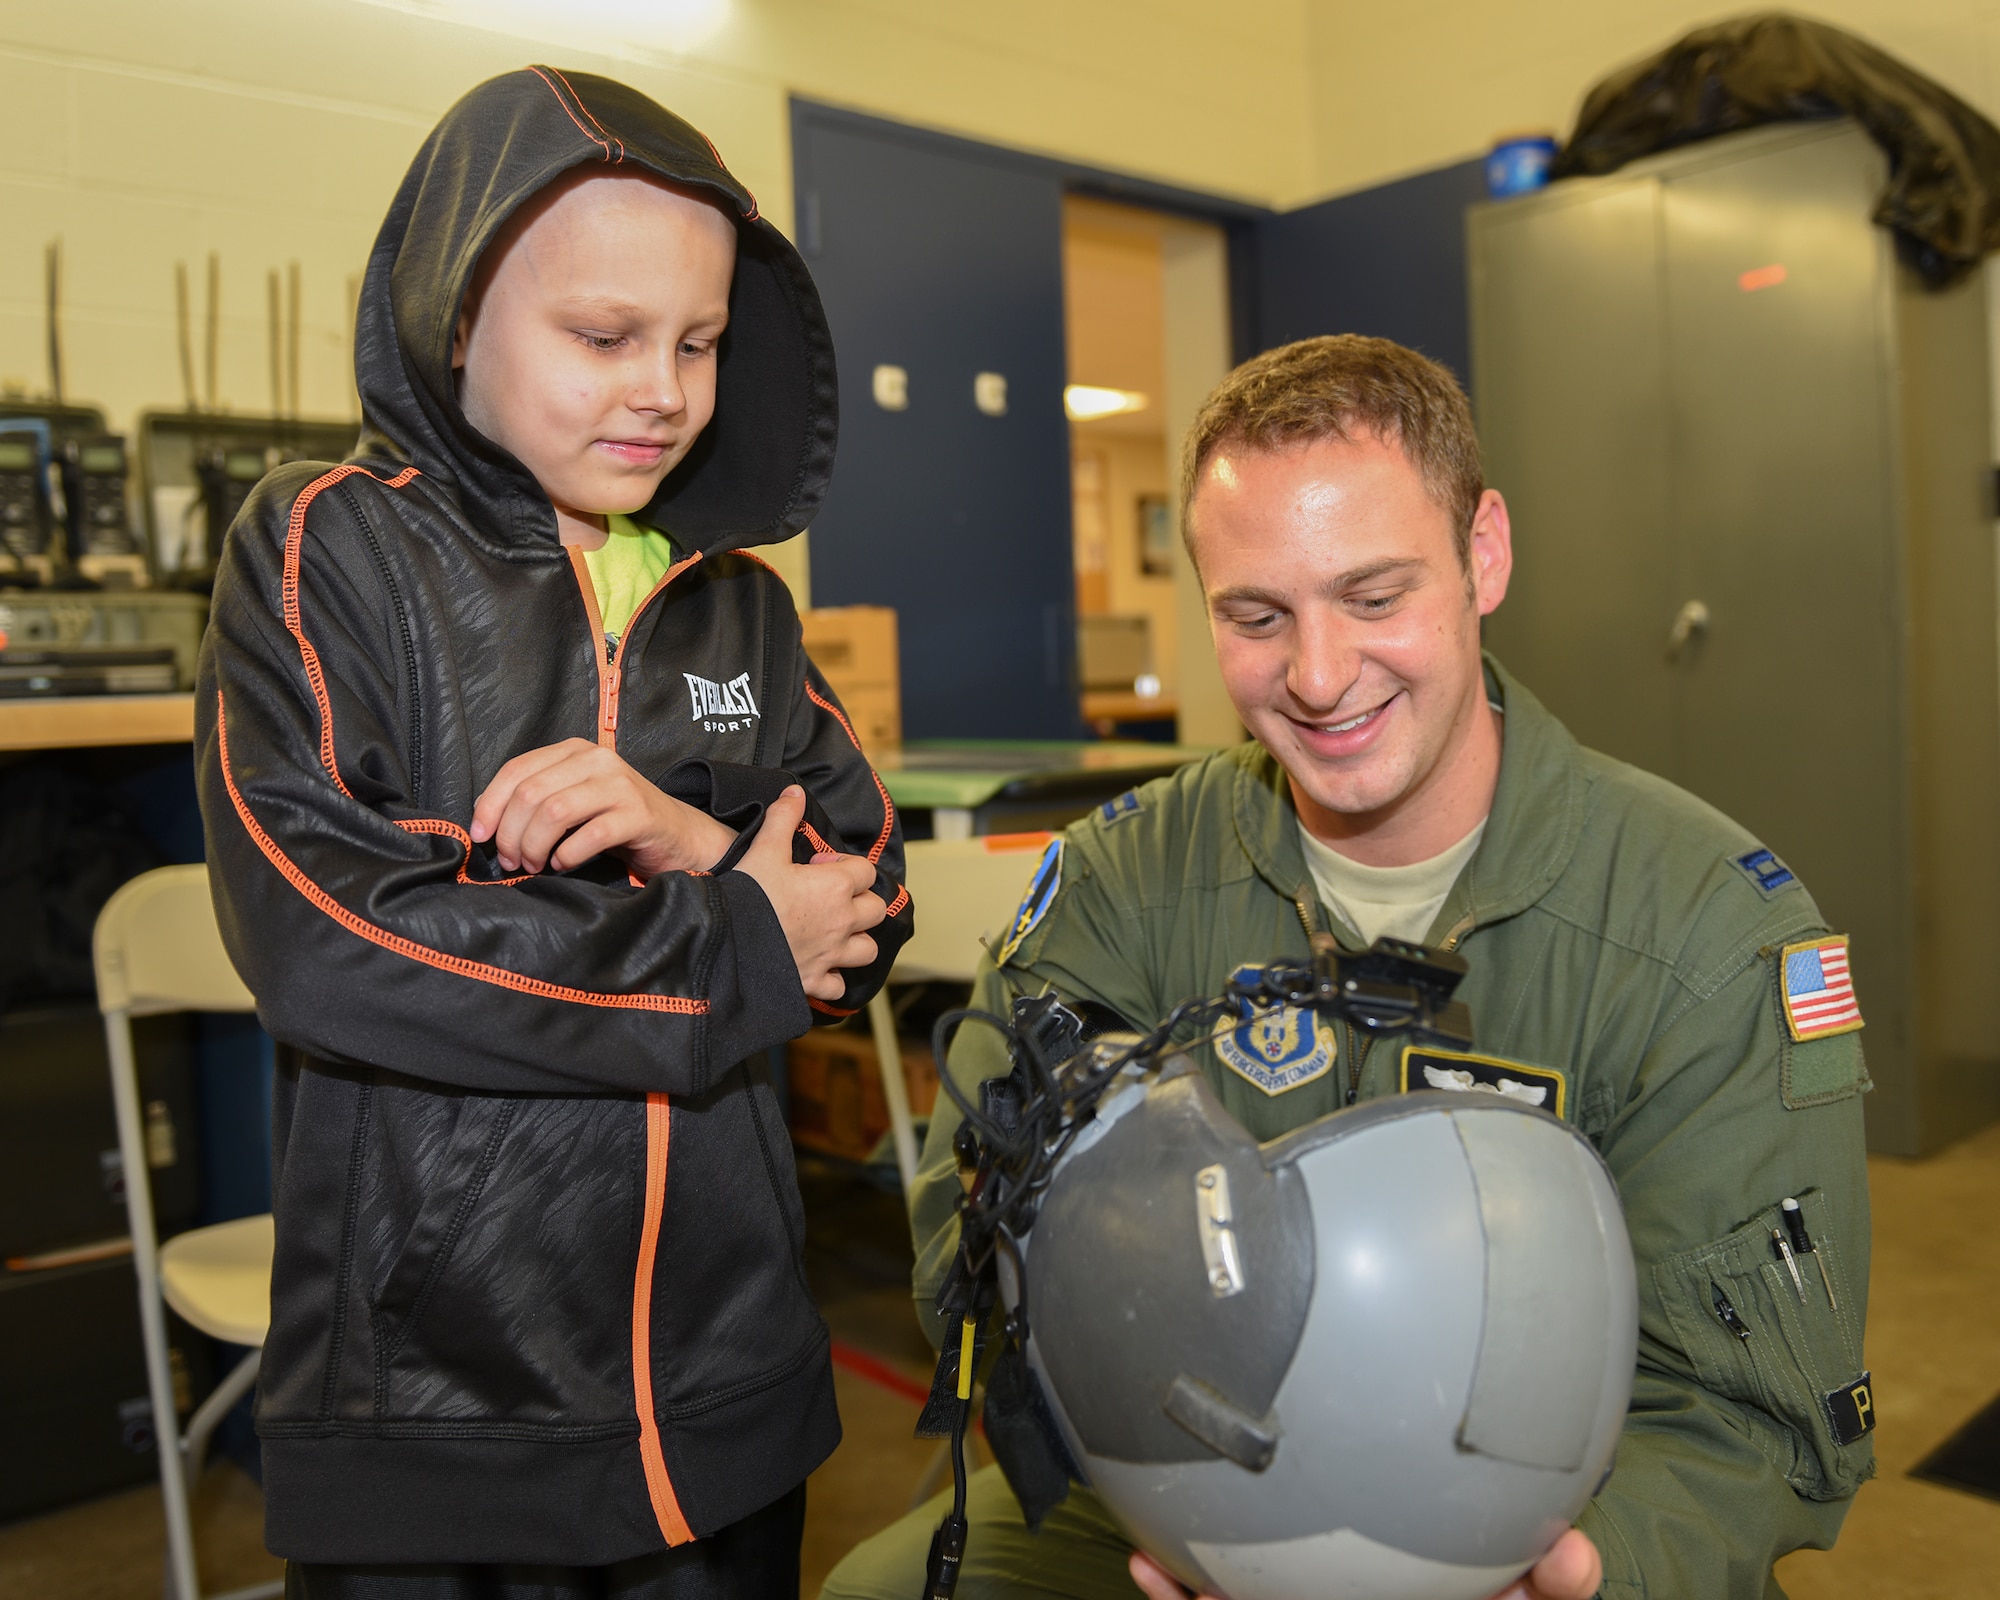 Capt. Charlie Baker, 758th Airlift Squadron pilot, shows Drew Palmer, 911th Airlift Wing Pilot for a Day, an aircrew member helmet at the Pittsburgh International Airport Air Reserve Station, Pa., Nov. 4, 2015. Palmer, who is battling bone cancer, was honored as a “Pilot for a Day” and made an honorary Second Lieutenant before taking a tour of the base and seeing everything that pilots must do before being able to fly. (U.S. Air Force photo by Staff Sgt. Joshua J. Seybert)